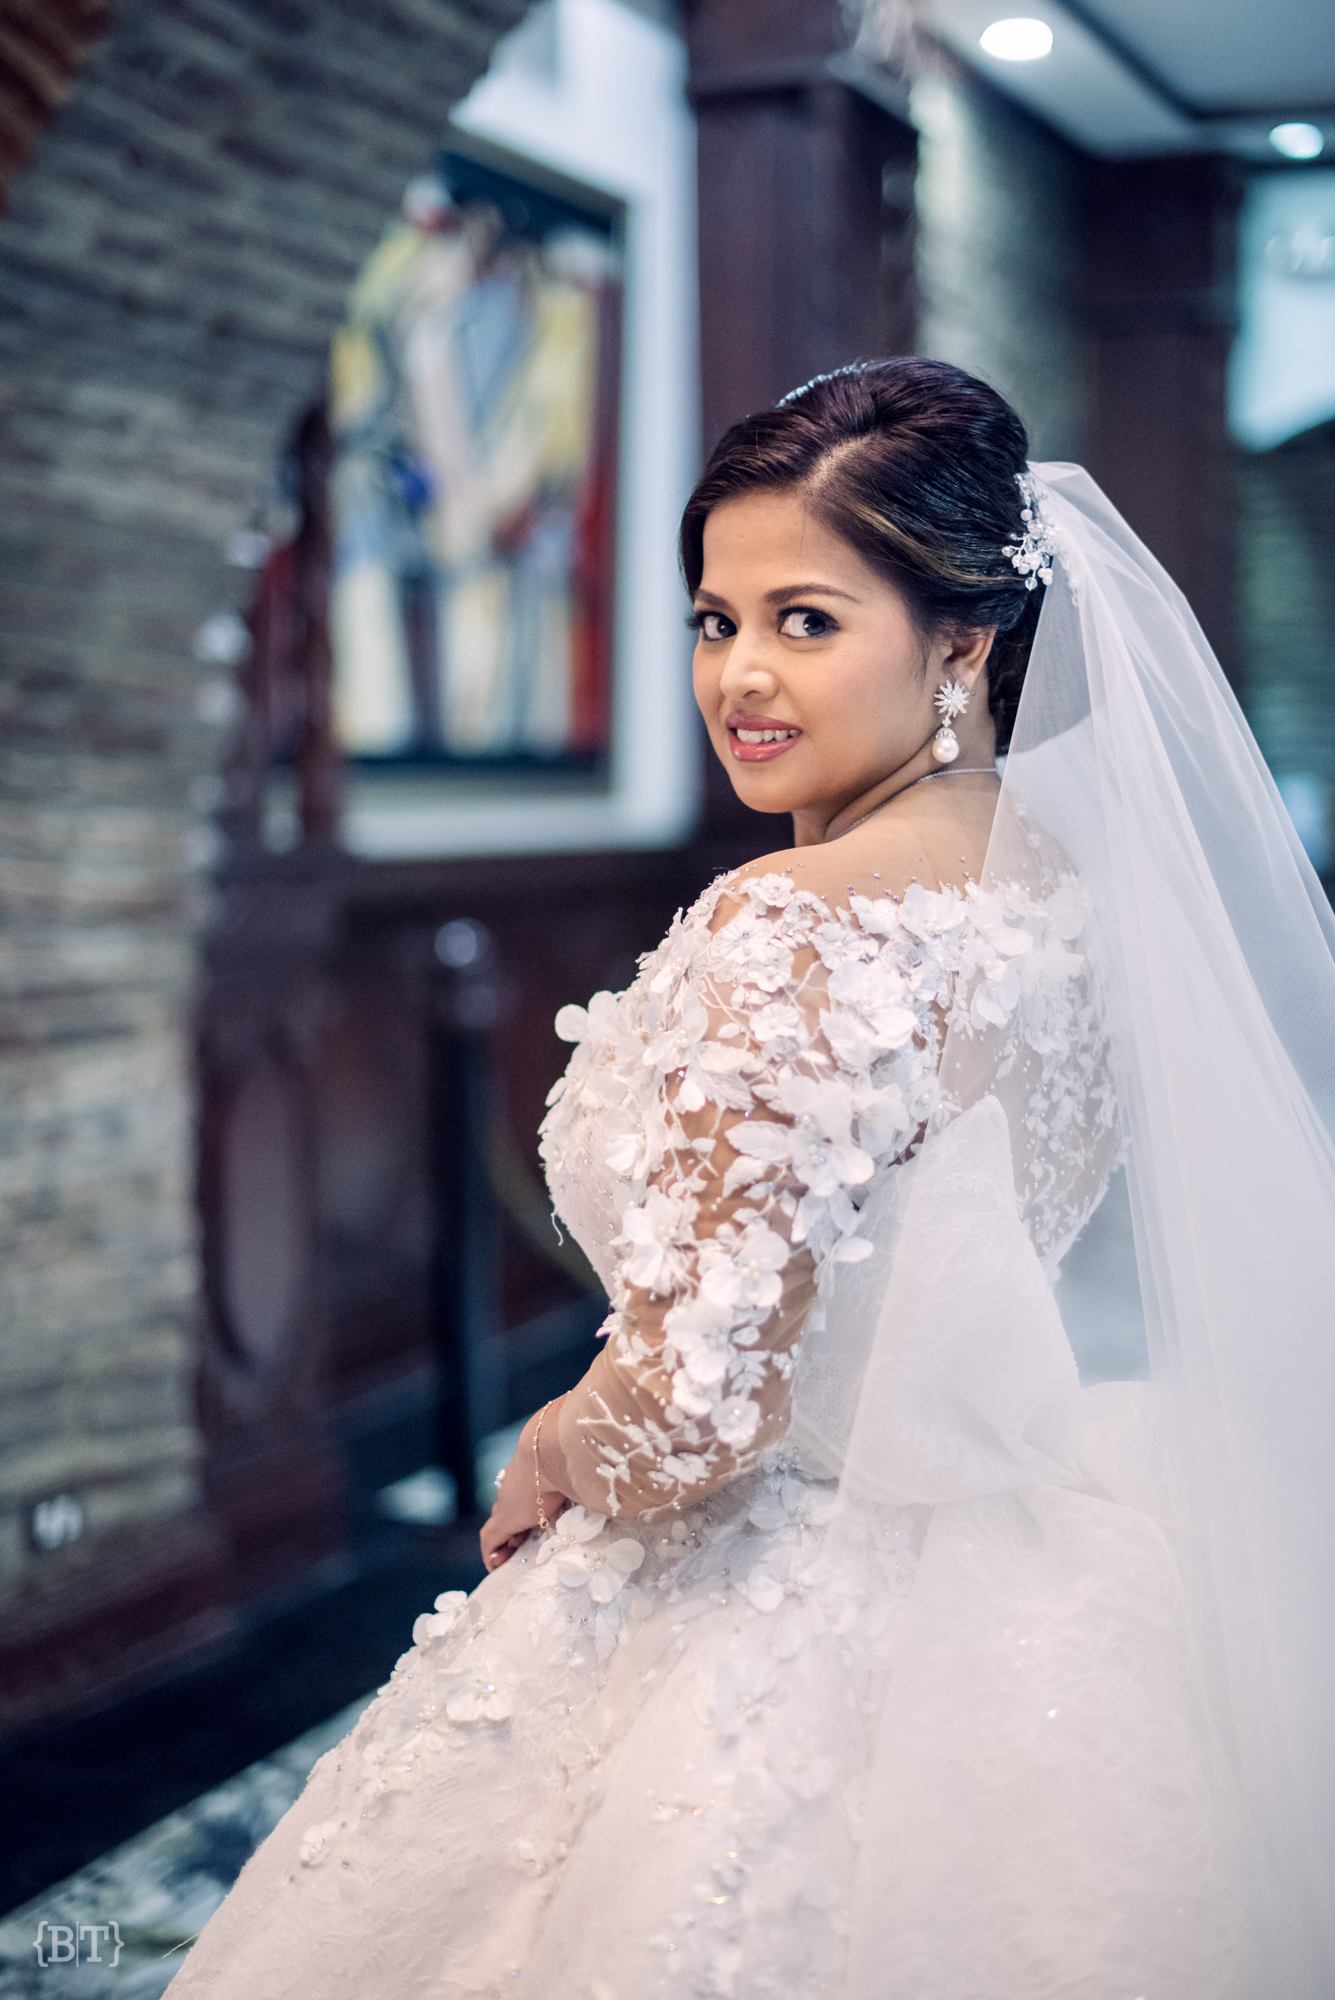 Where To Get Christian Wedding Gowns In India? | WedMeGood